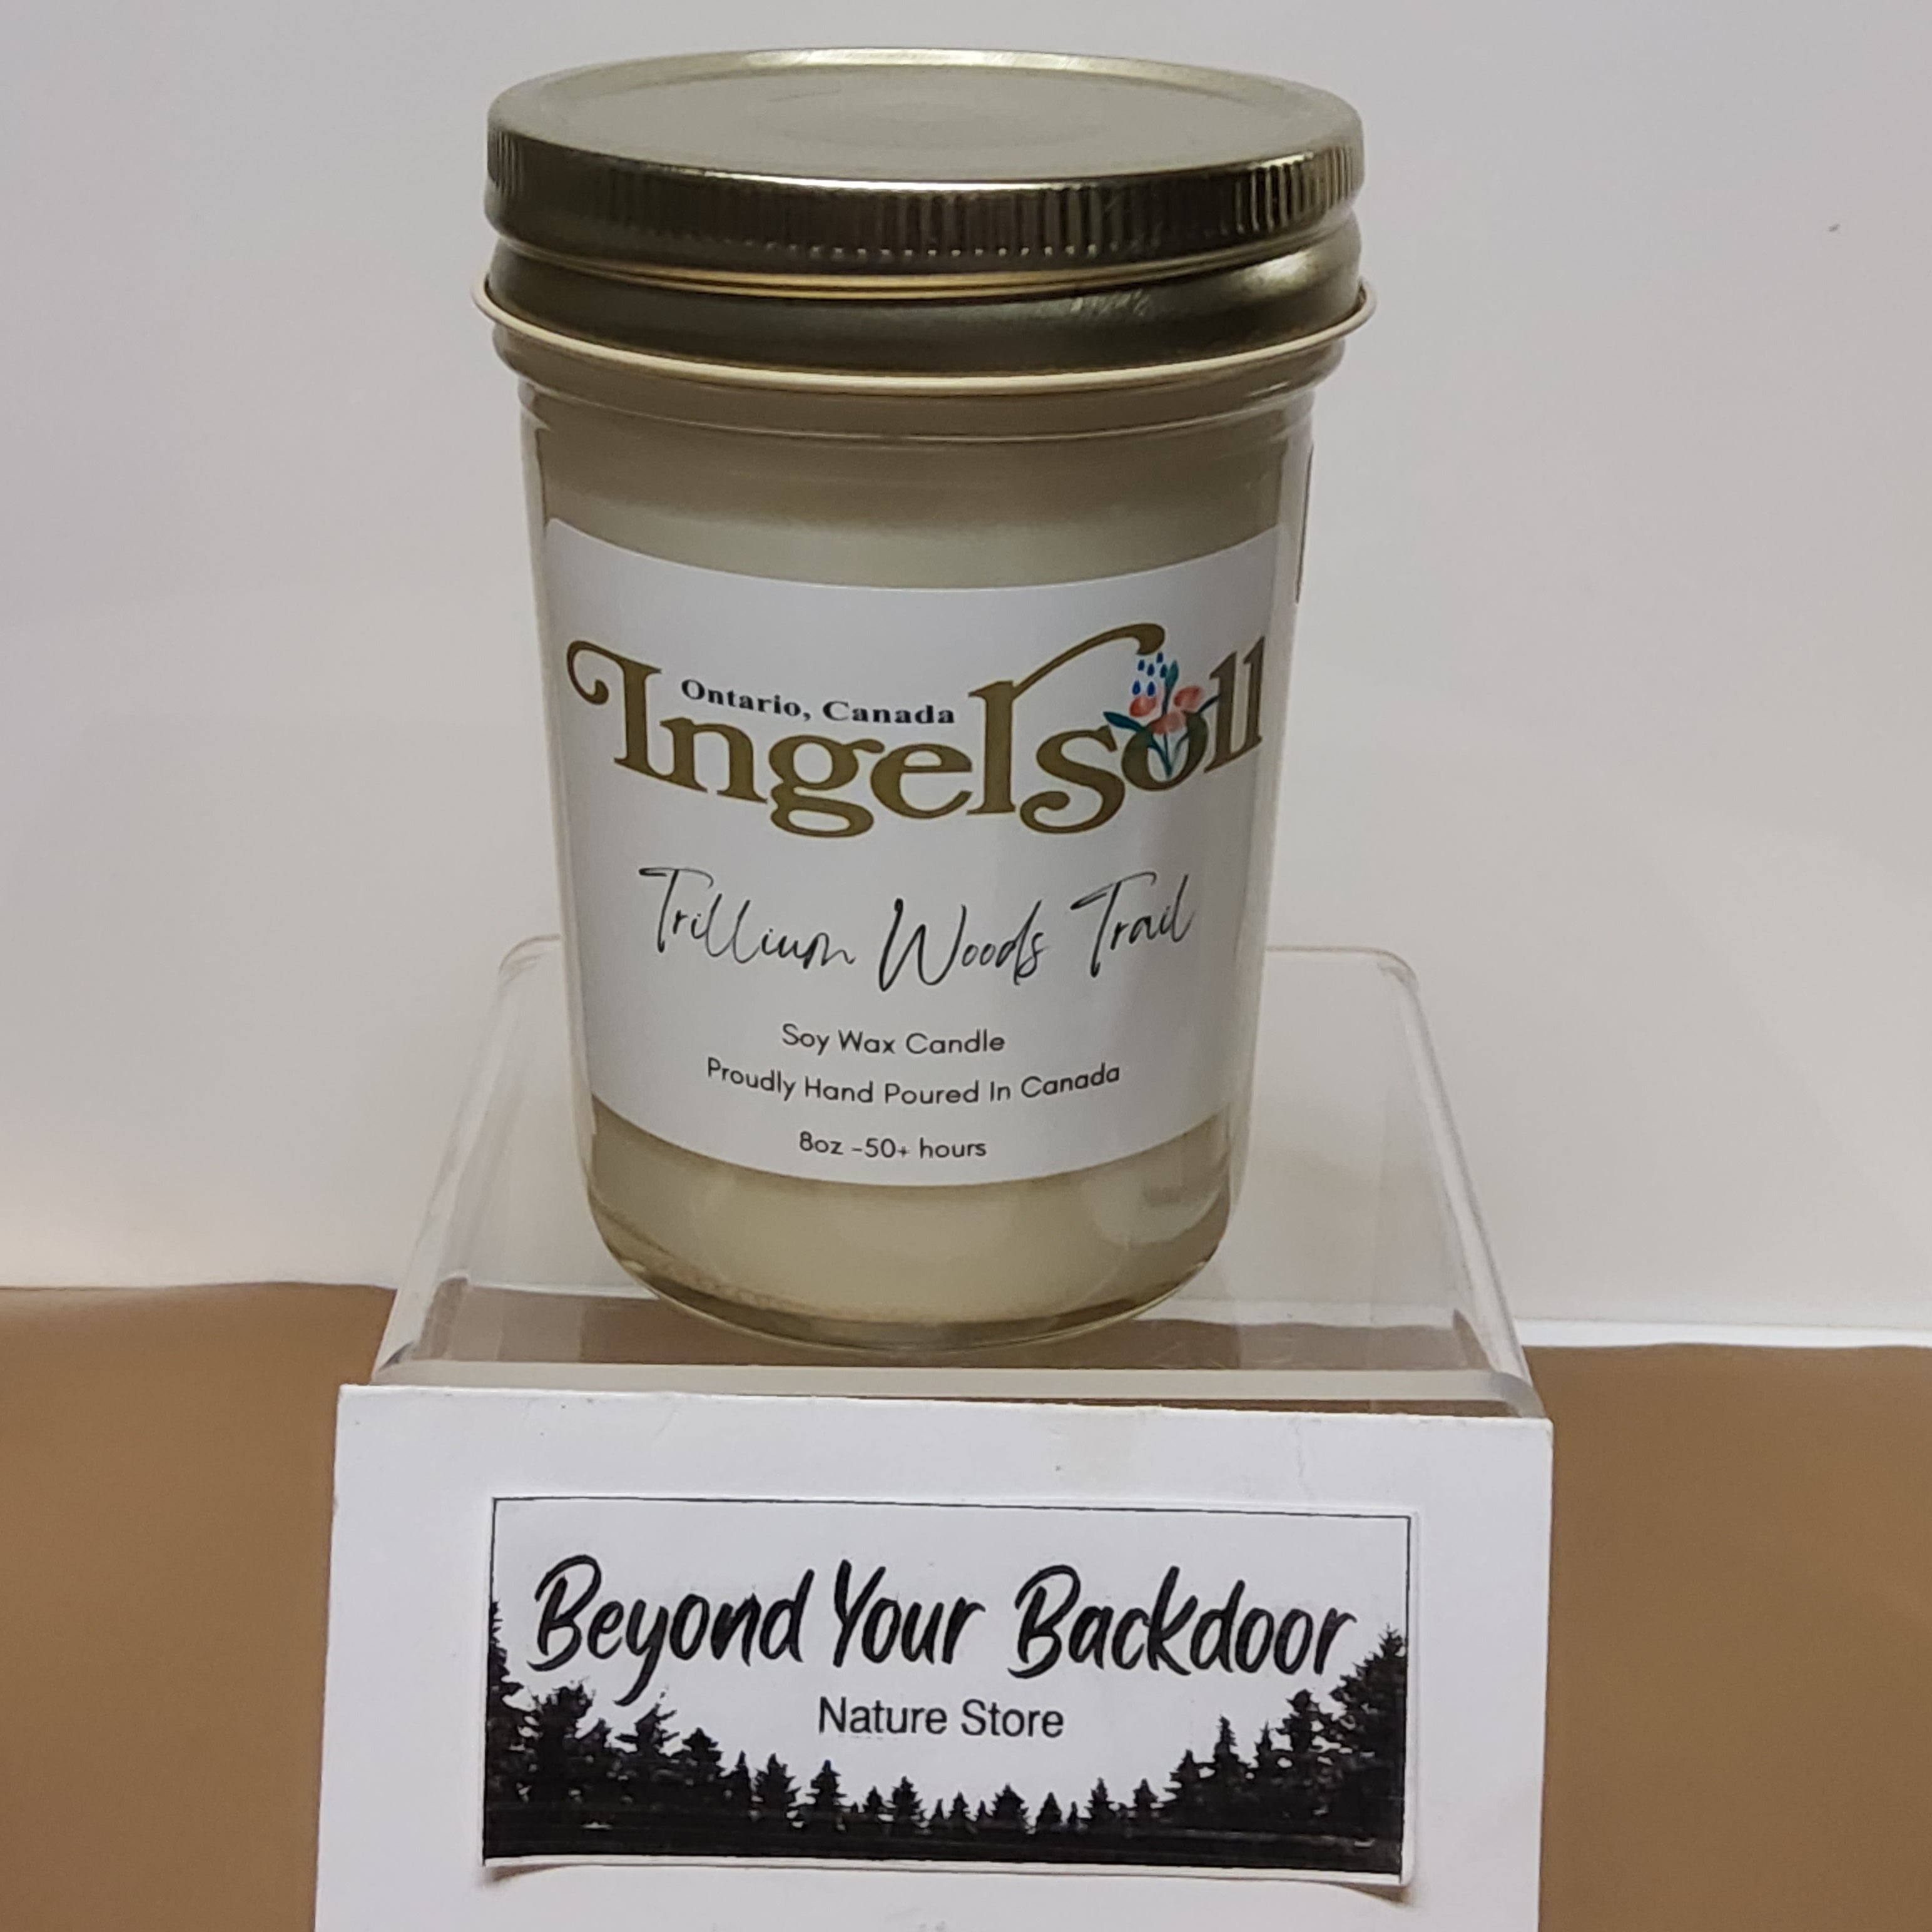 Ingersoll Soy Wax Candle - Trillium Woods Trail - 8oz